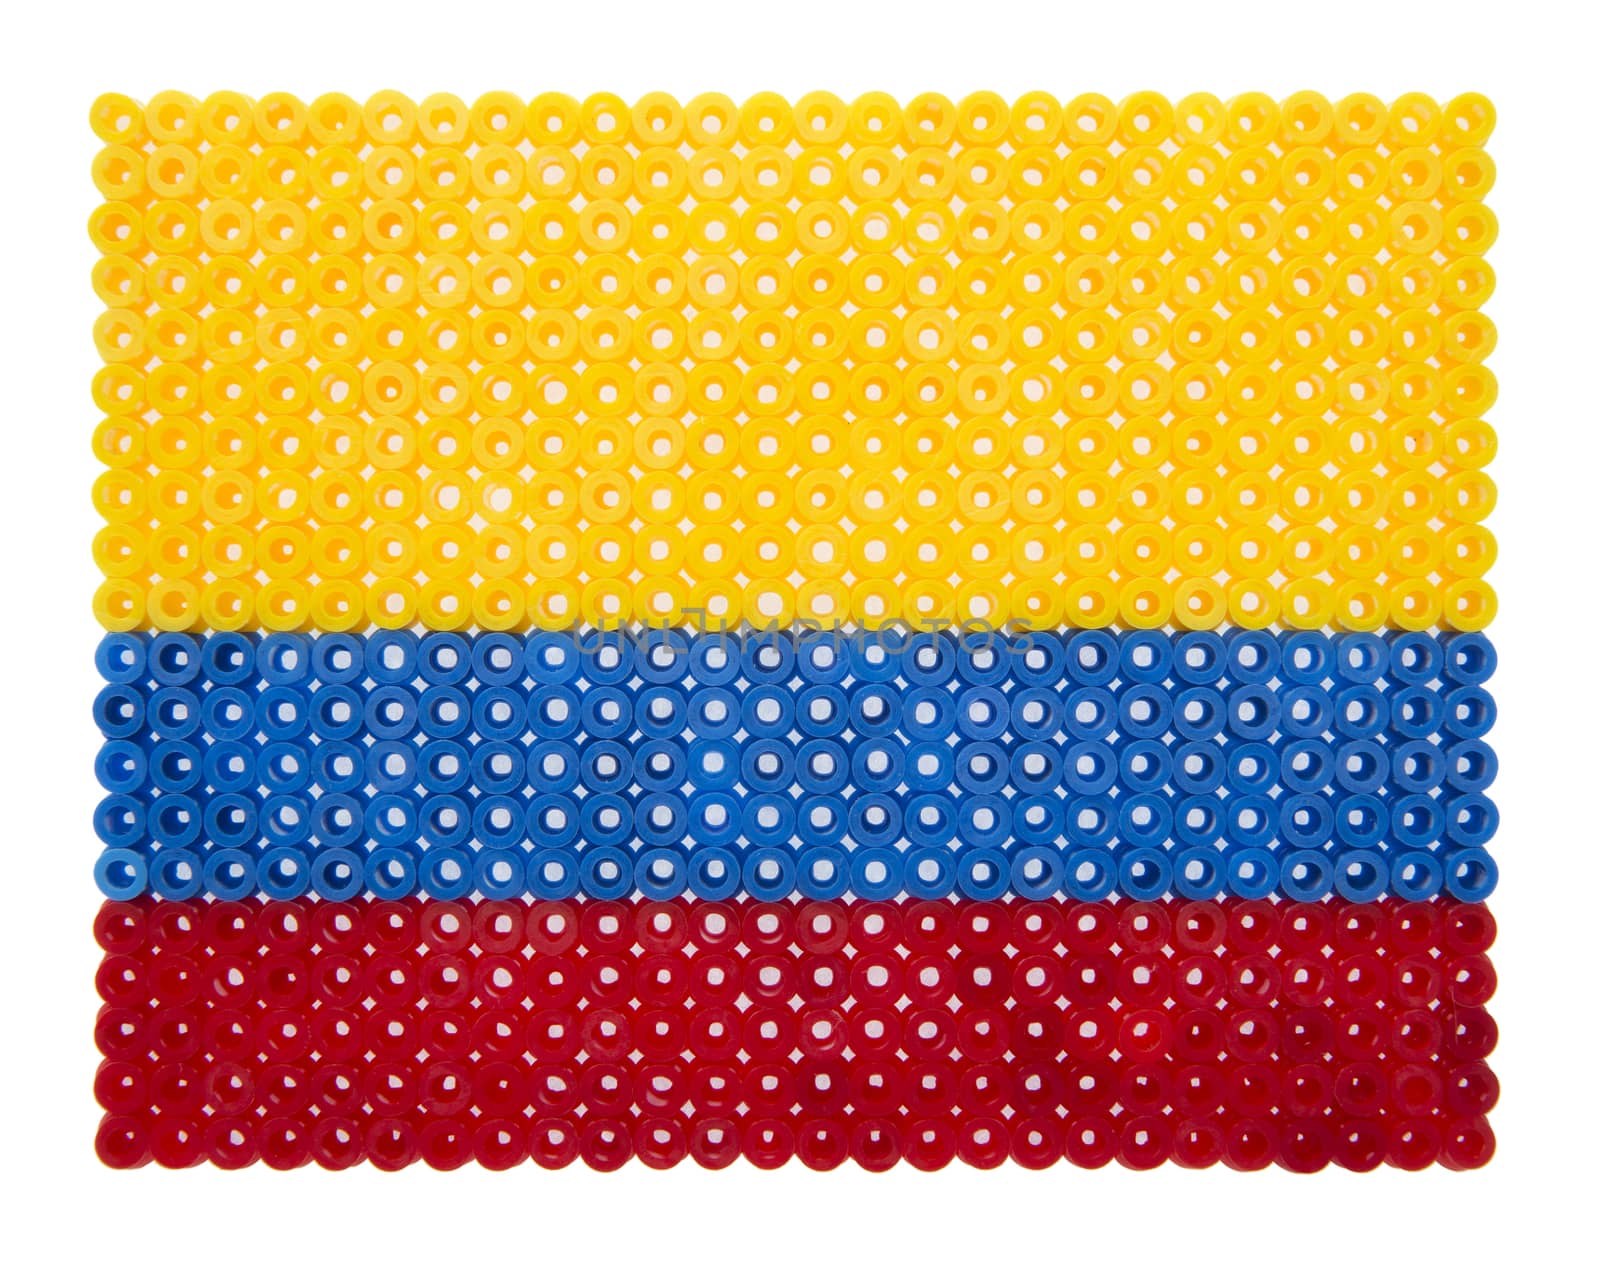 Colombian Flag made of plastic pearls